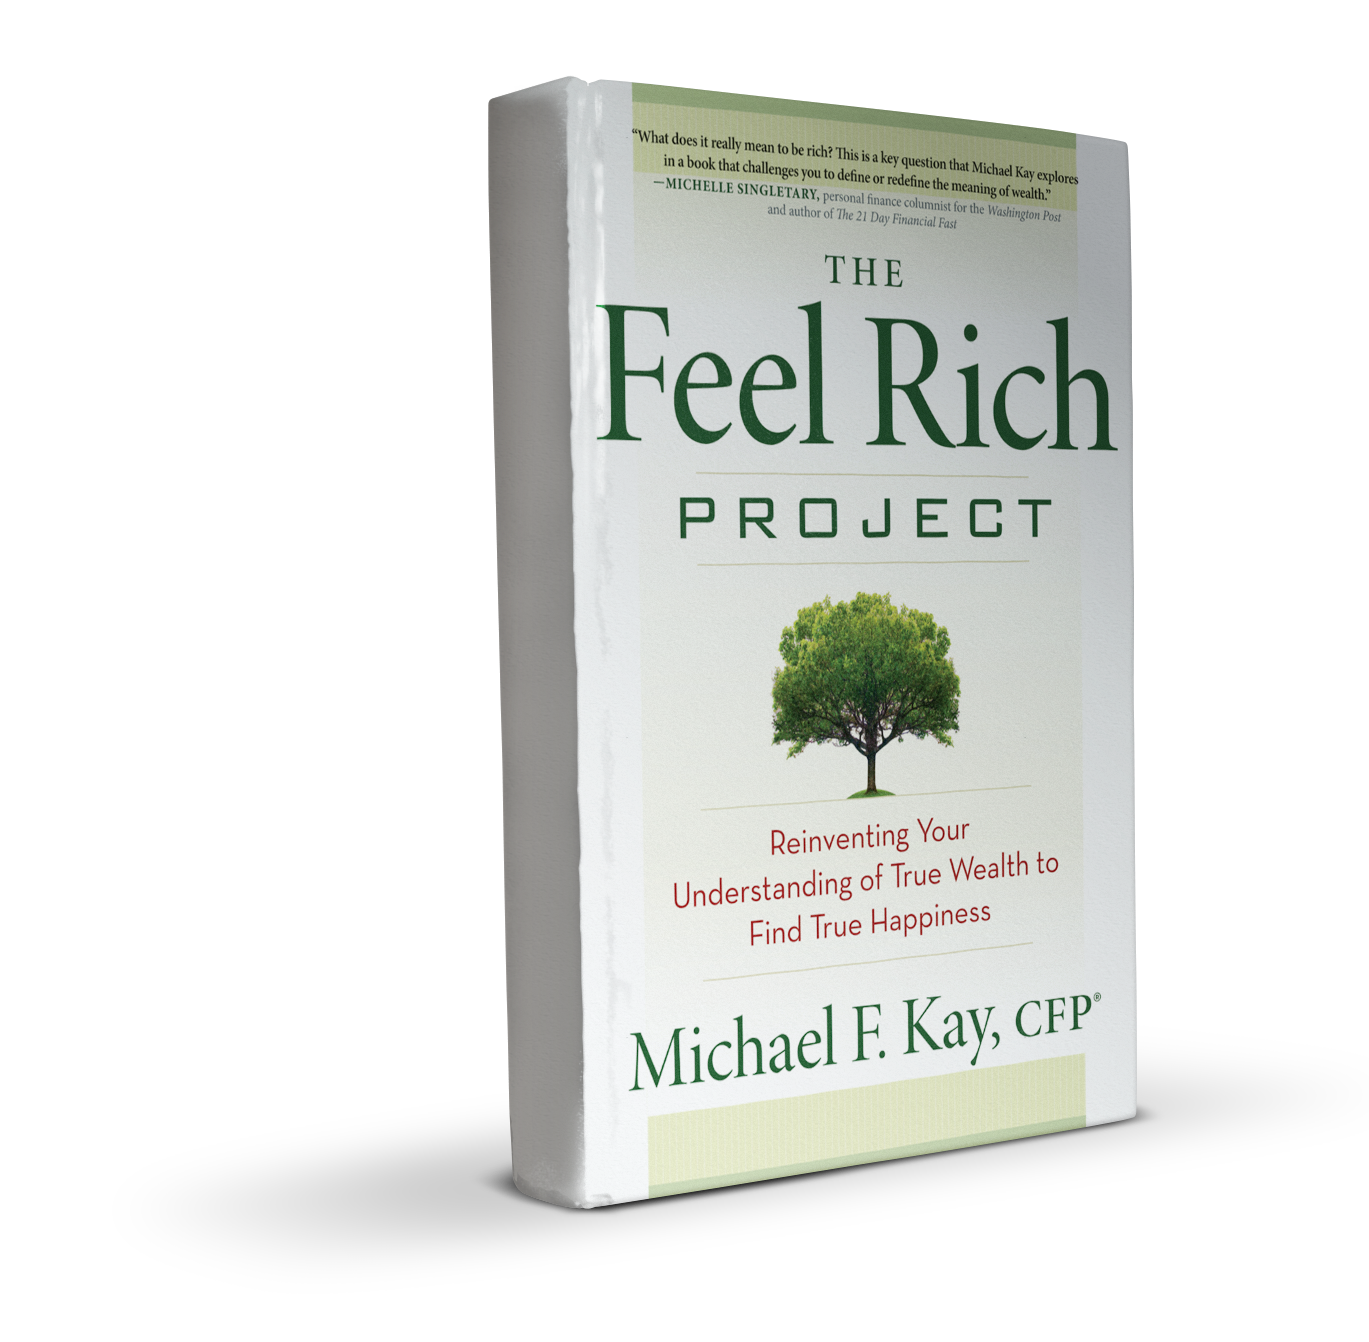 MY NEW BOOK “THE FEEL RICH PROJECT” IS FINALLY HERE!